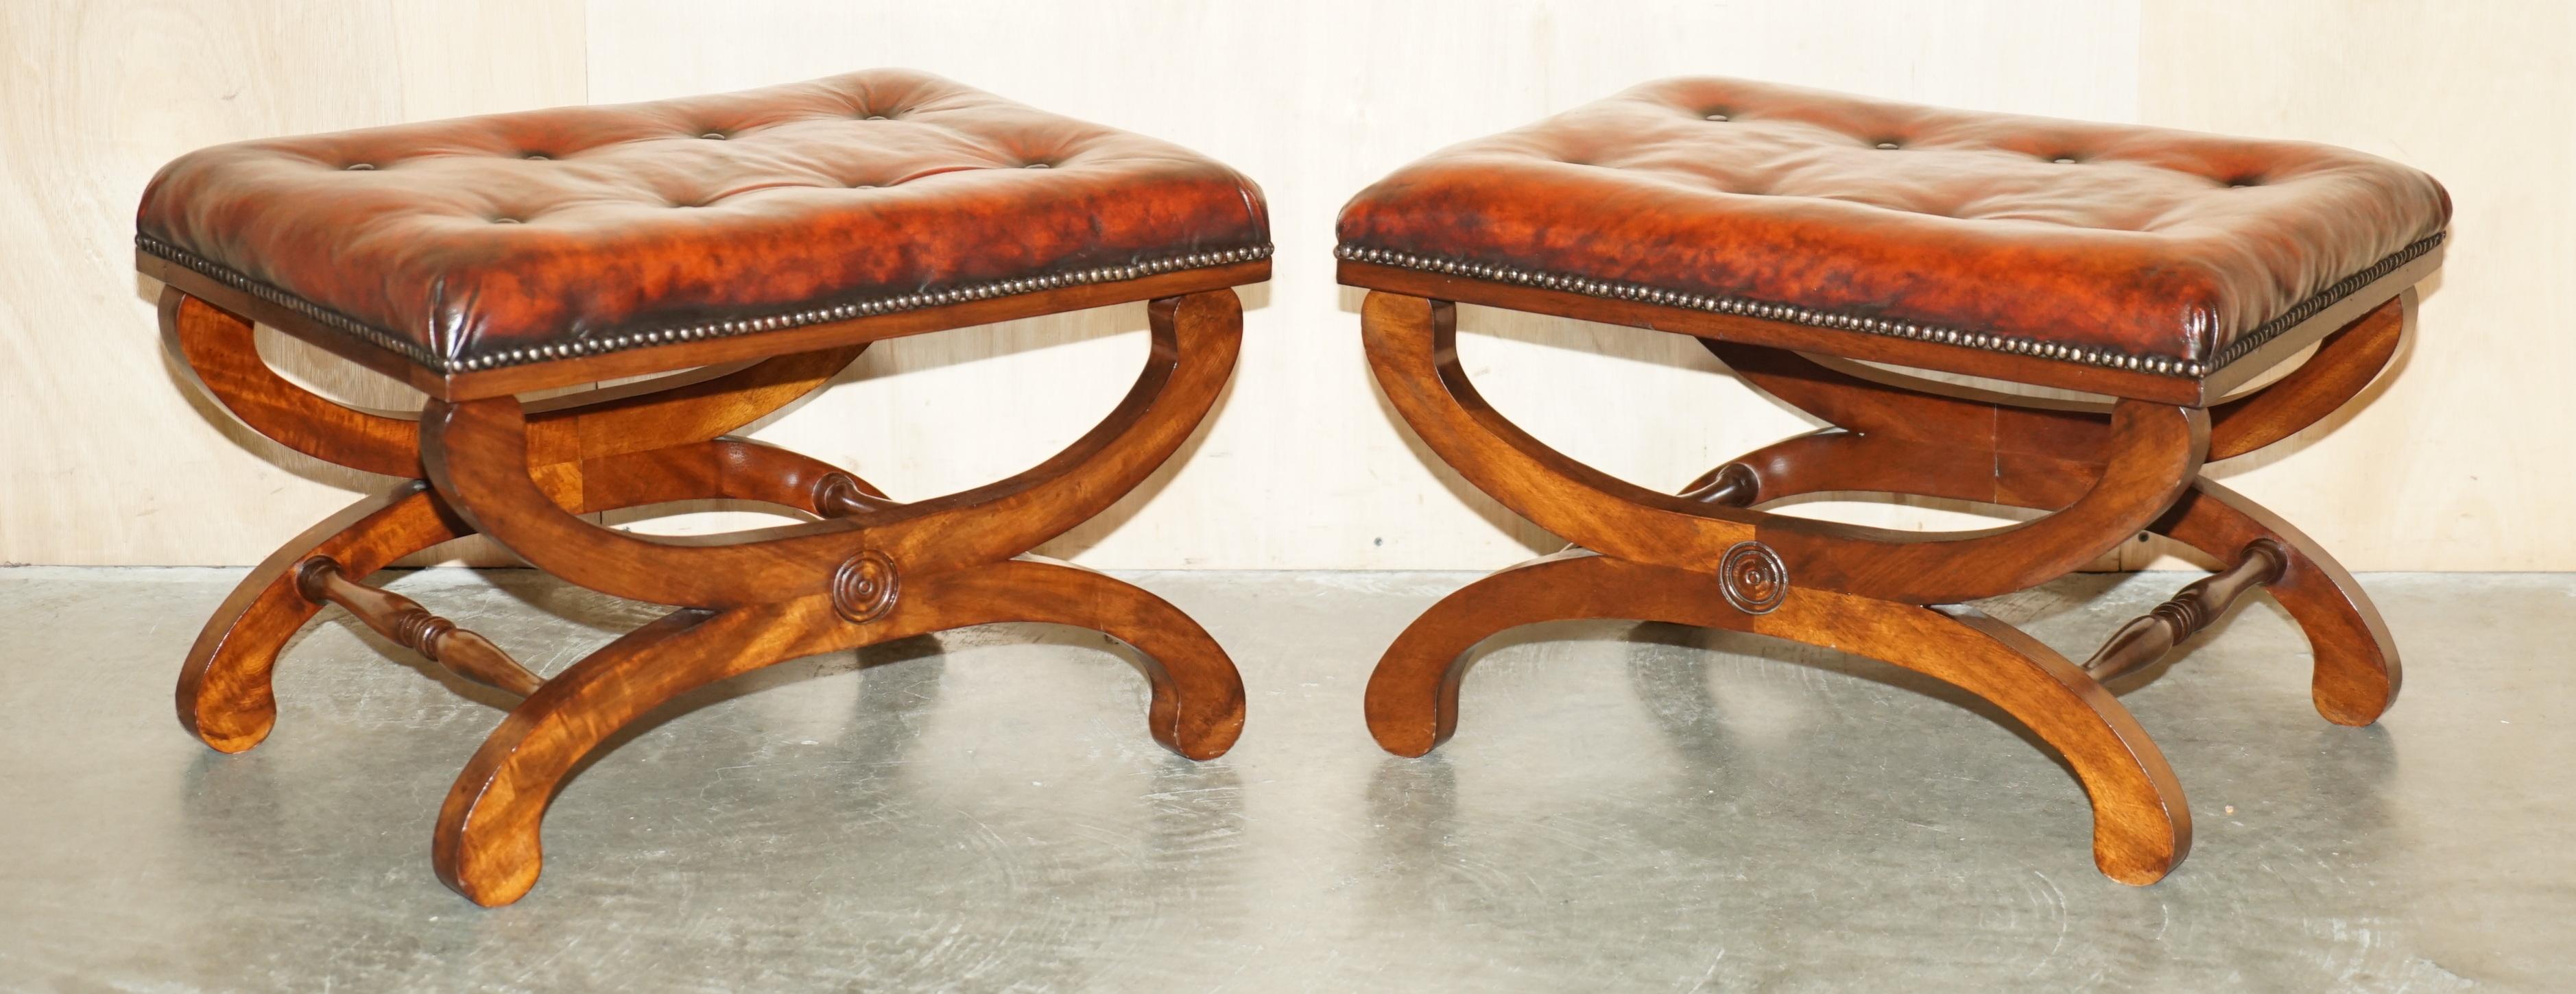 Royal House Antiques

Royal House Antiques is delighted to offer for sale this stunning pair of fully restored hand dyed brown leather Antique Chesterfield footstools with X-Framed Baron bases

Please note the delivery fee listed is just a guide, it